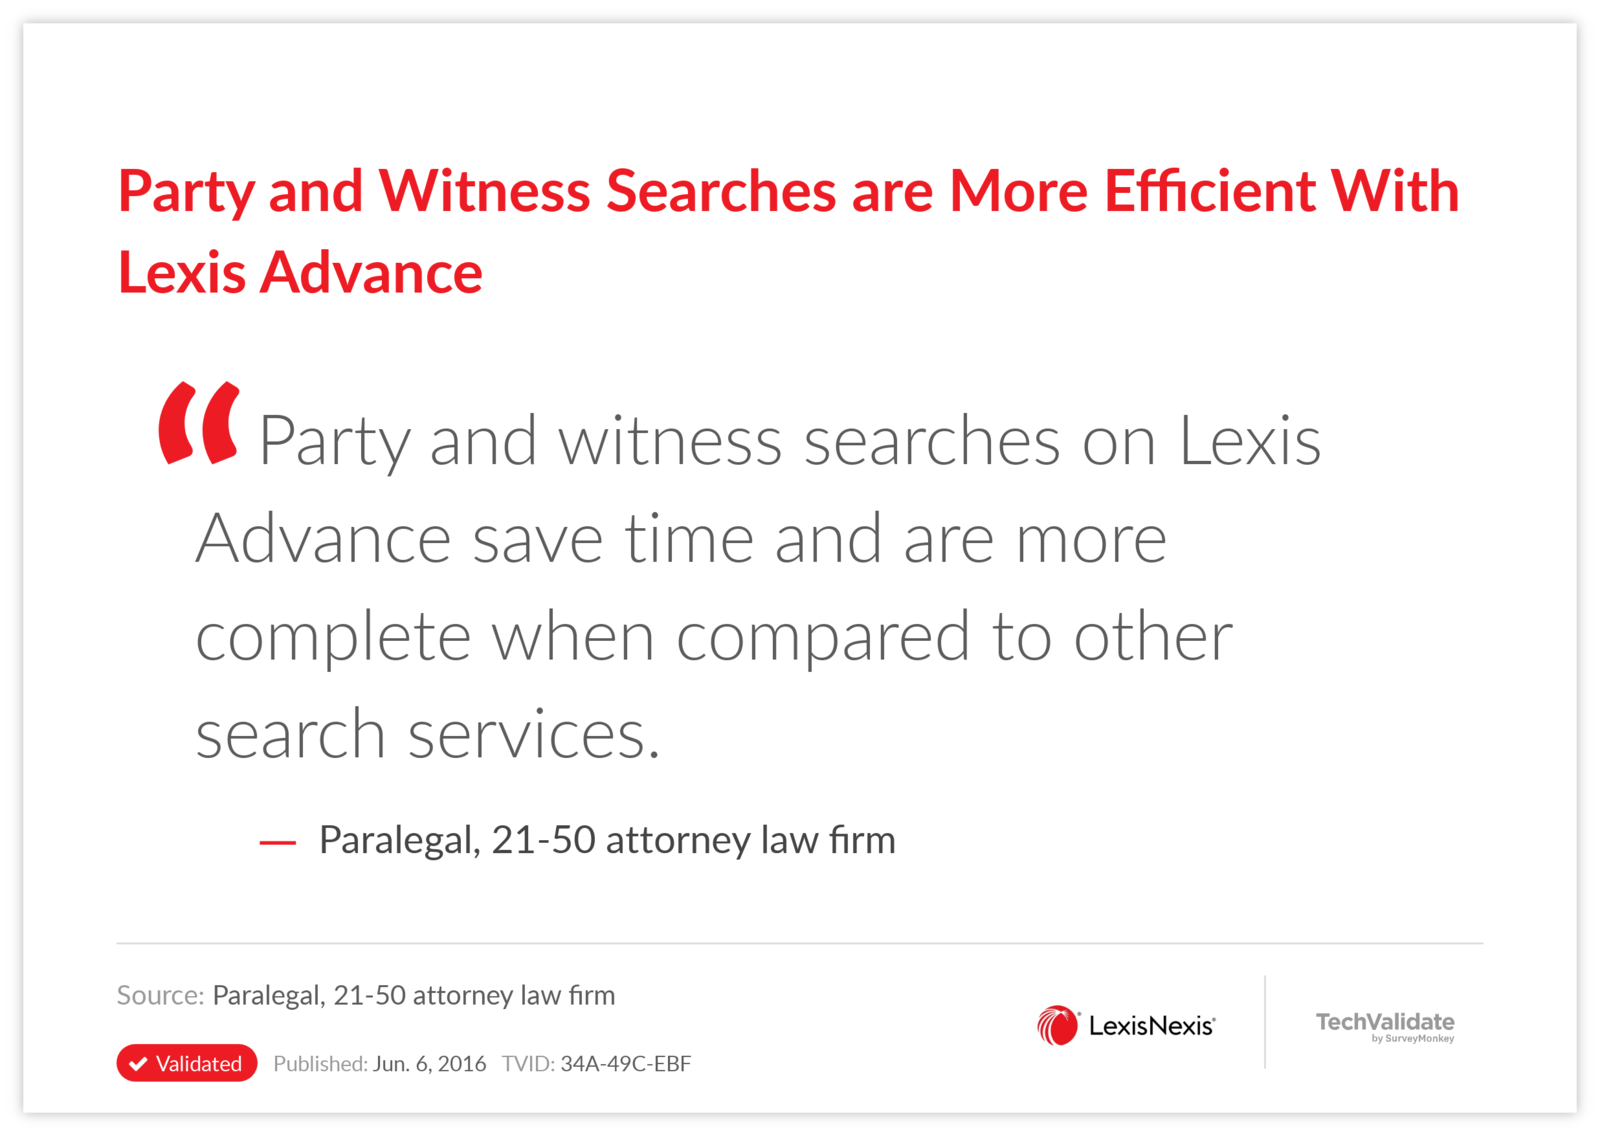 Party and Witness Searches are More Efficient With Lexis Advance